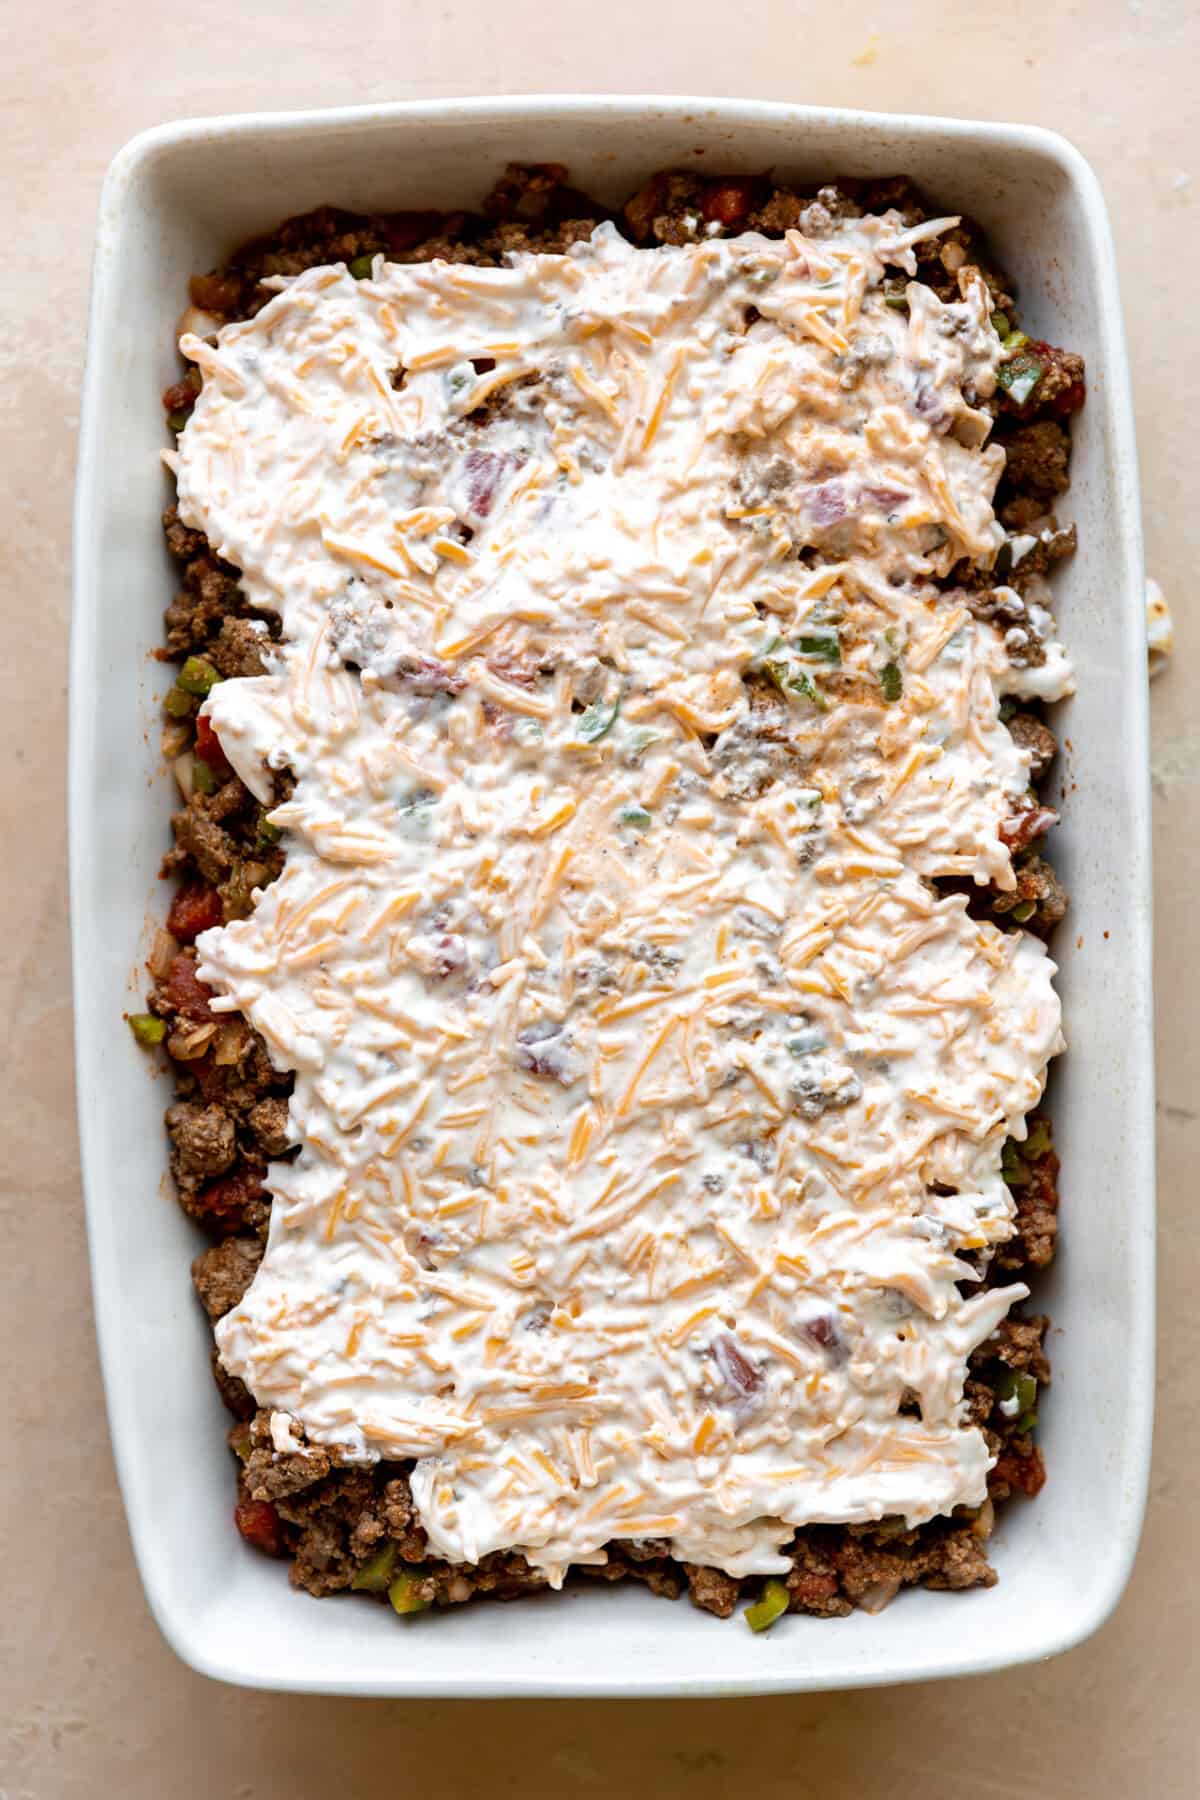 Cheese layer added on top of ground beef and biscuit in a white baking dish. 